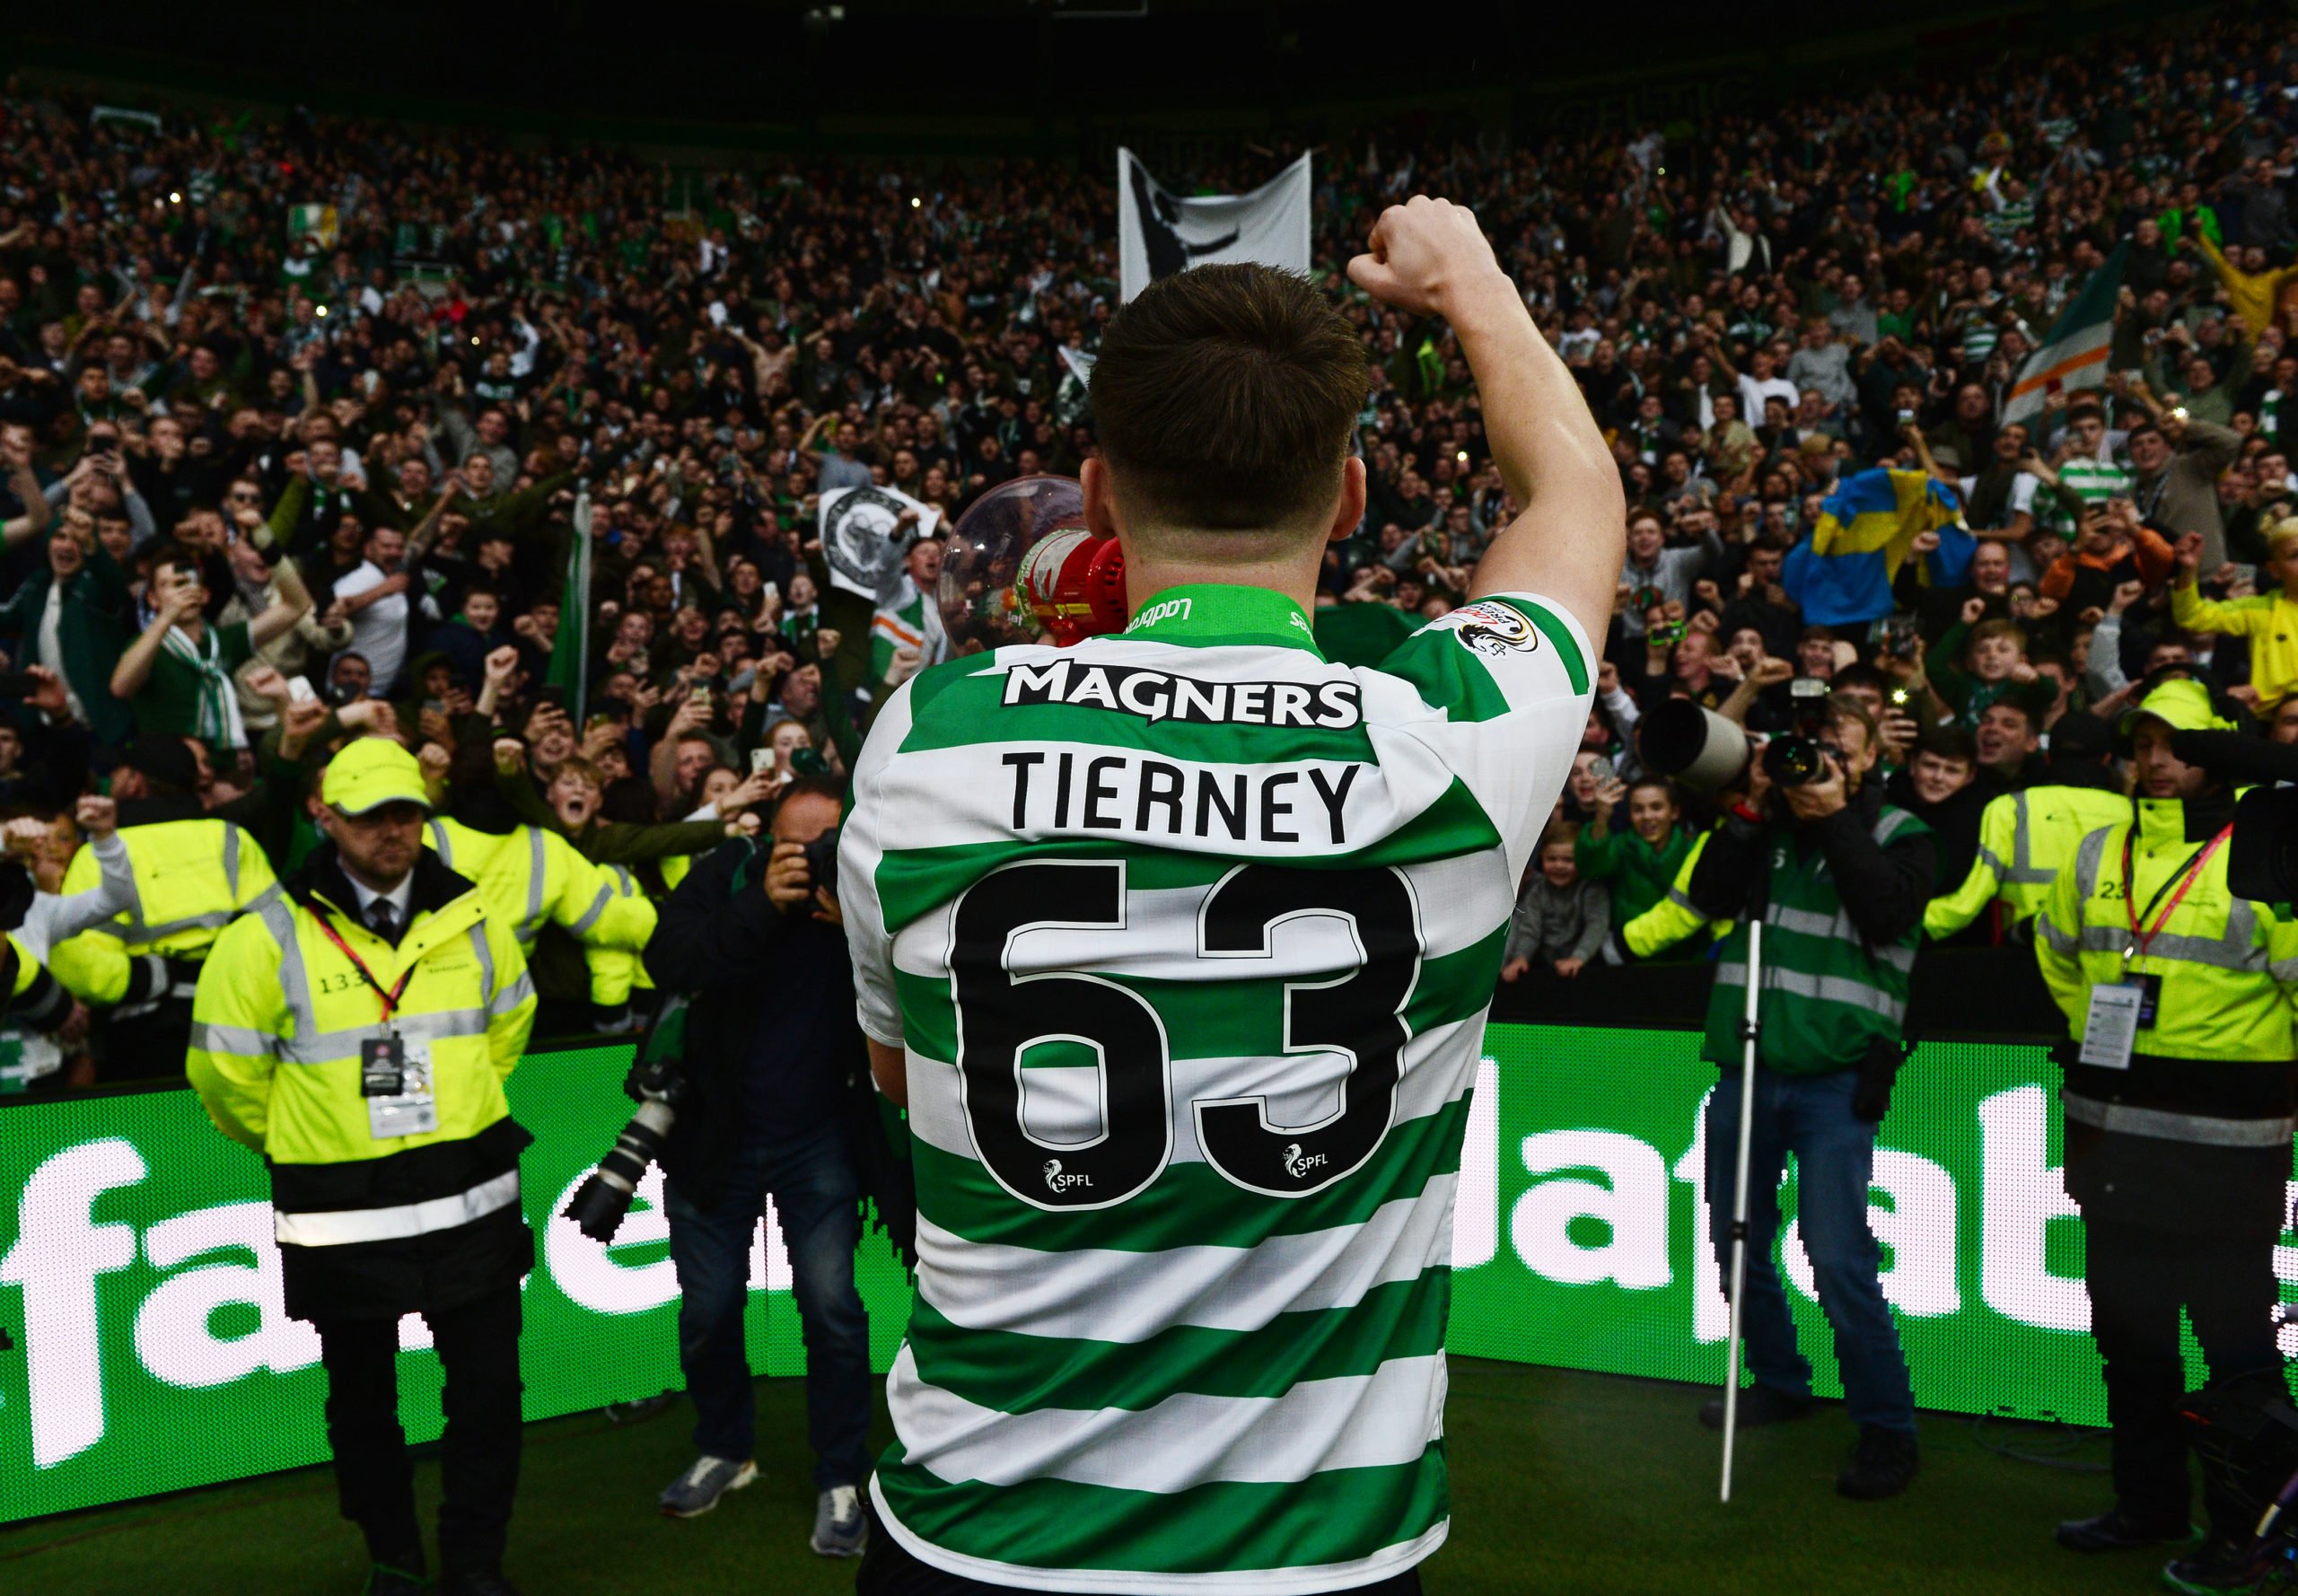 Arsenal and Scotland star man Kieran Tierney is evidence Celtic can produce elite talent